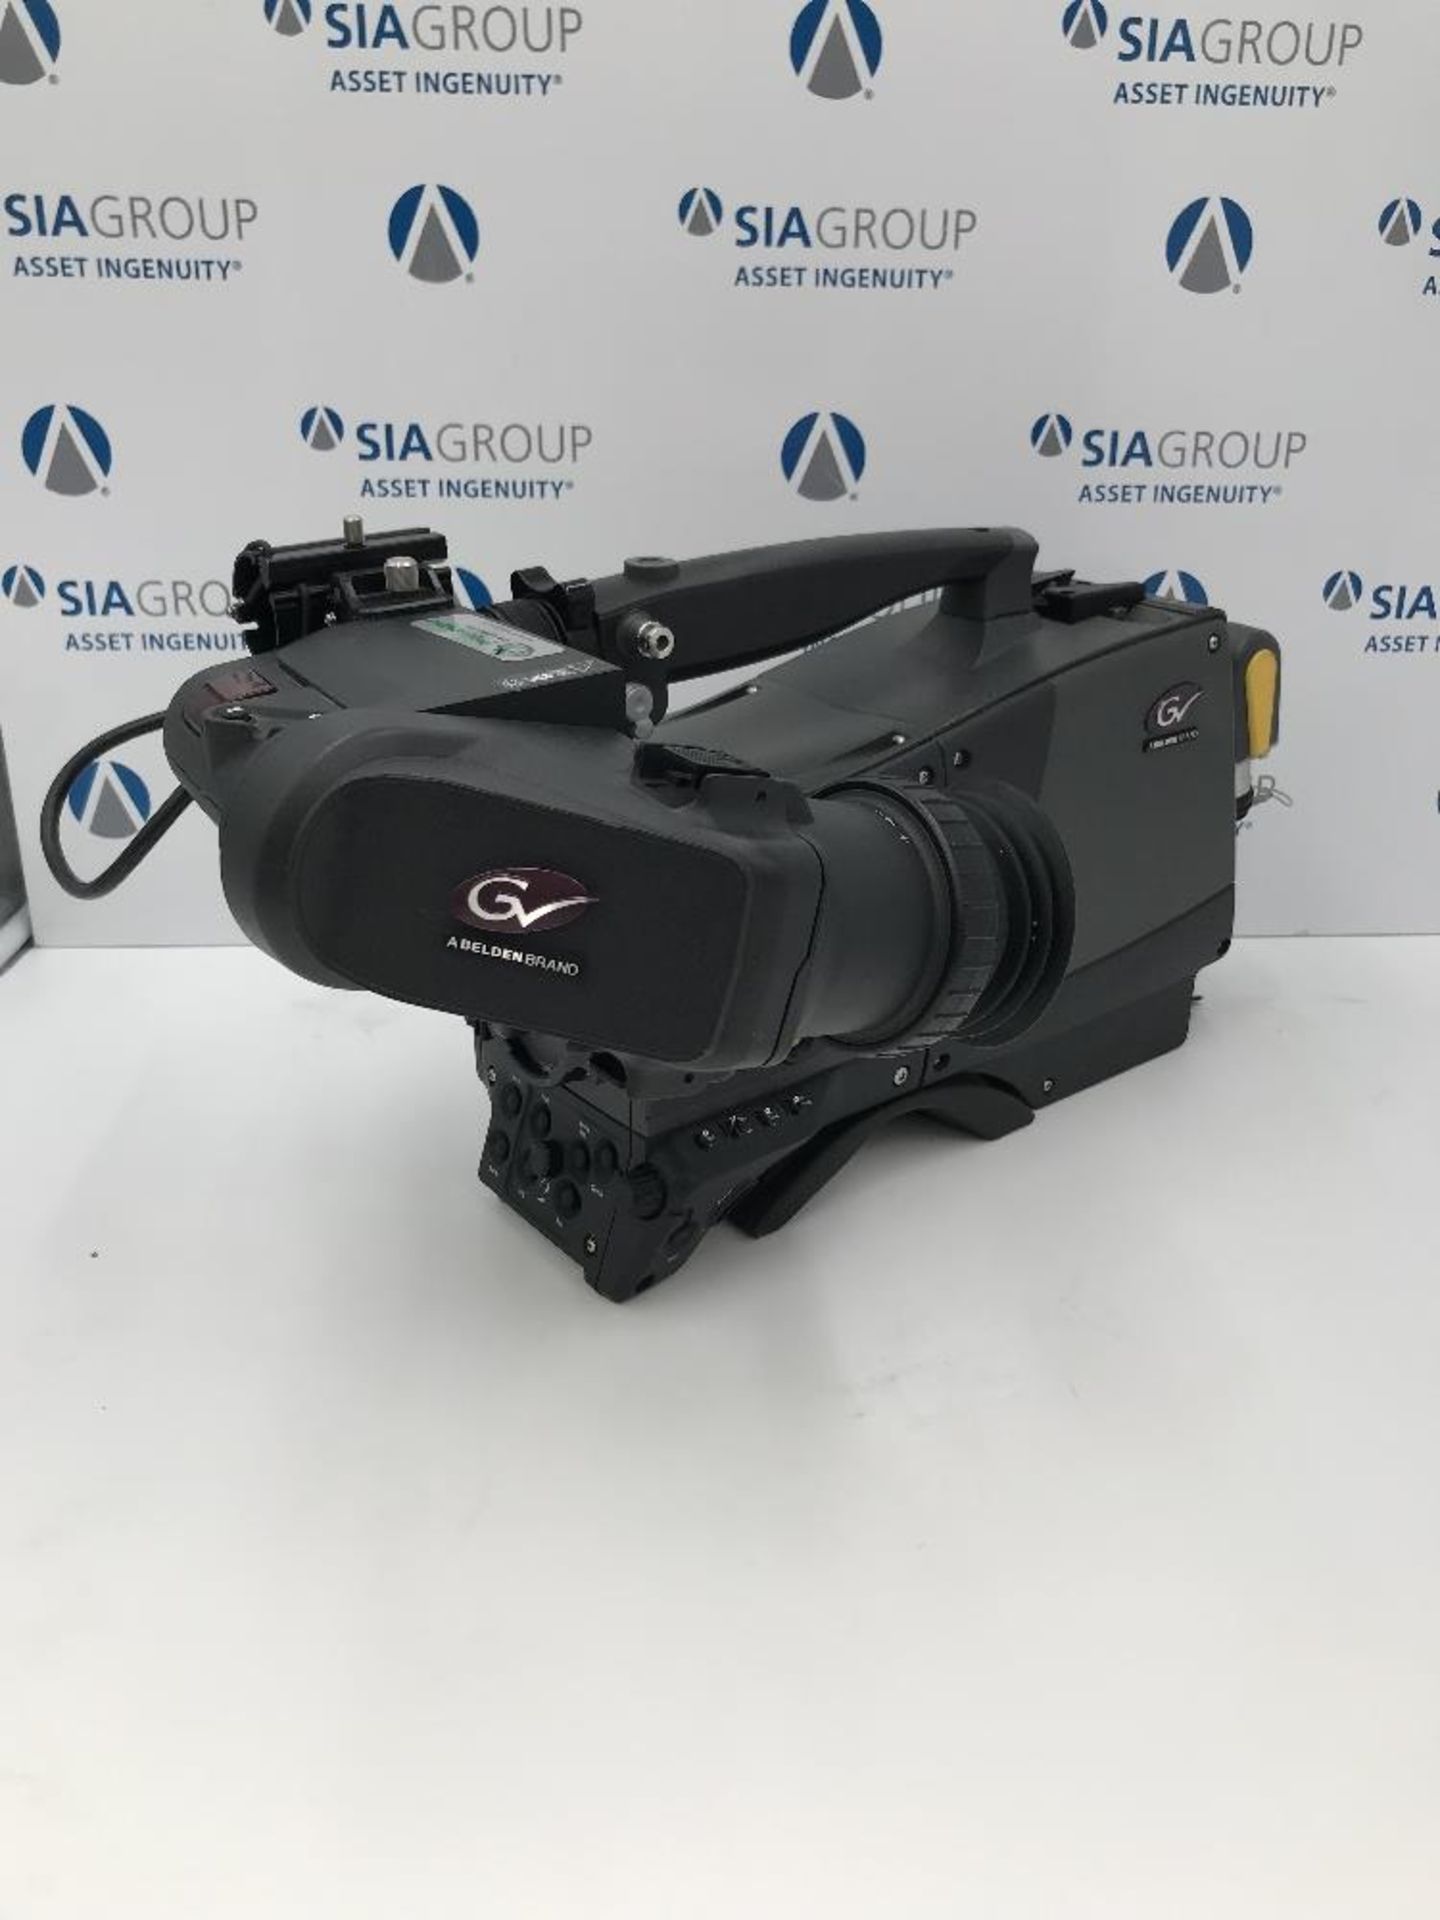 Grass Valley LDX 86N Universe 4K Camera with 7.4'' OLED Viewfinder & Camera Control Unit - Image 2 of 16